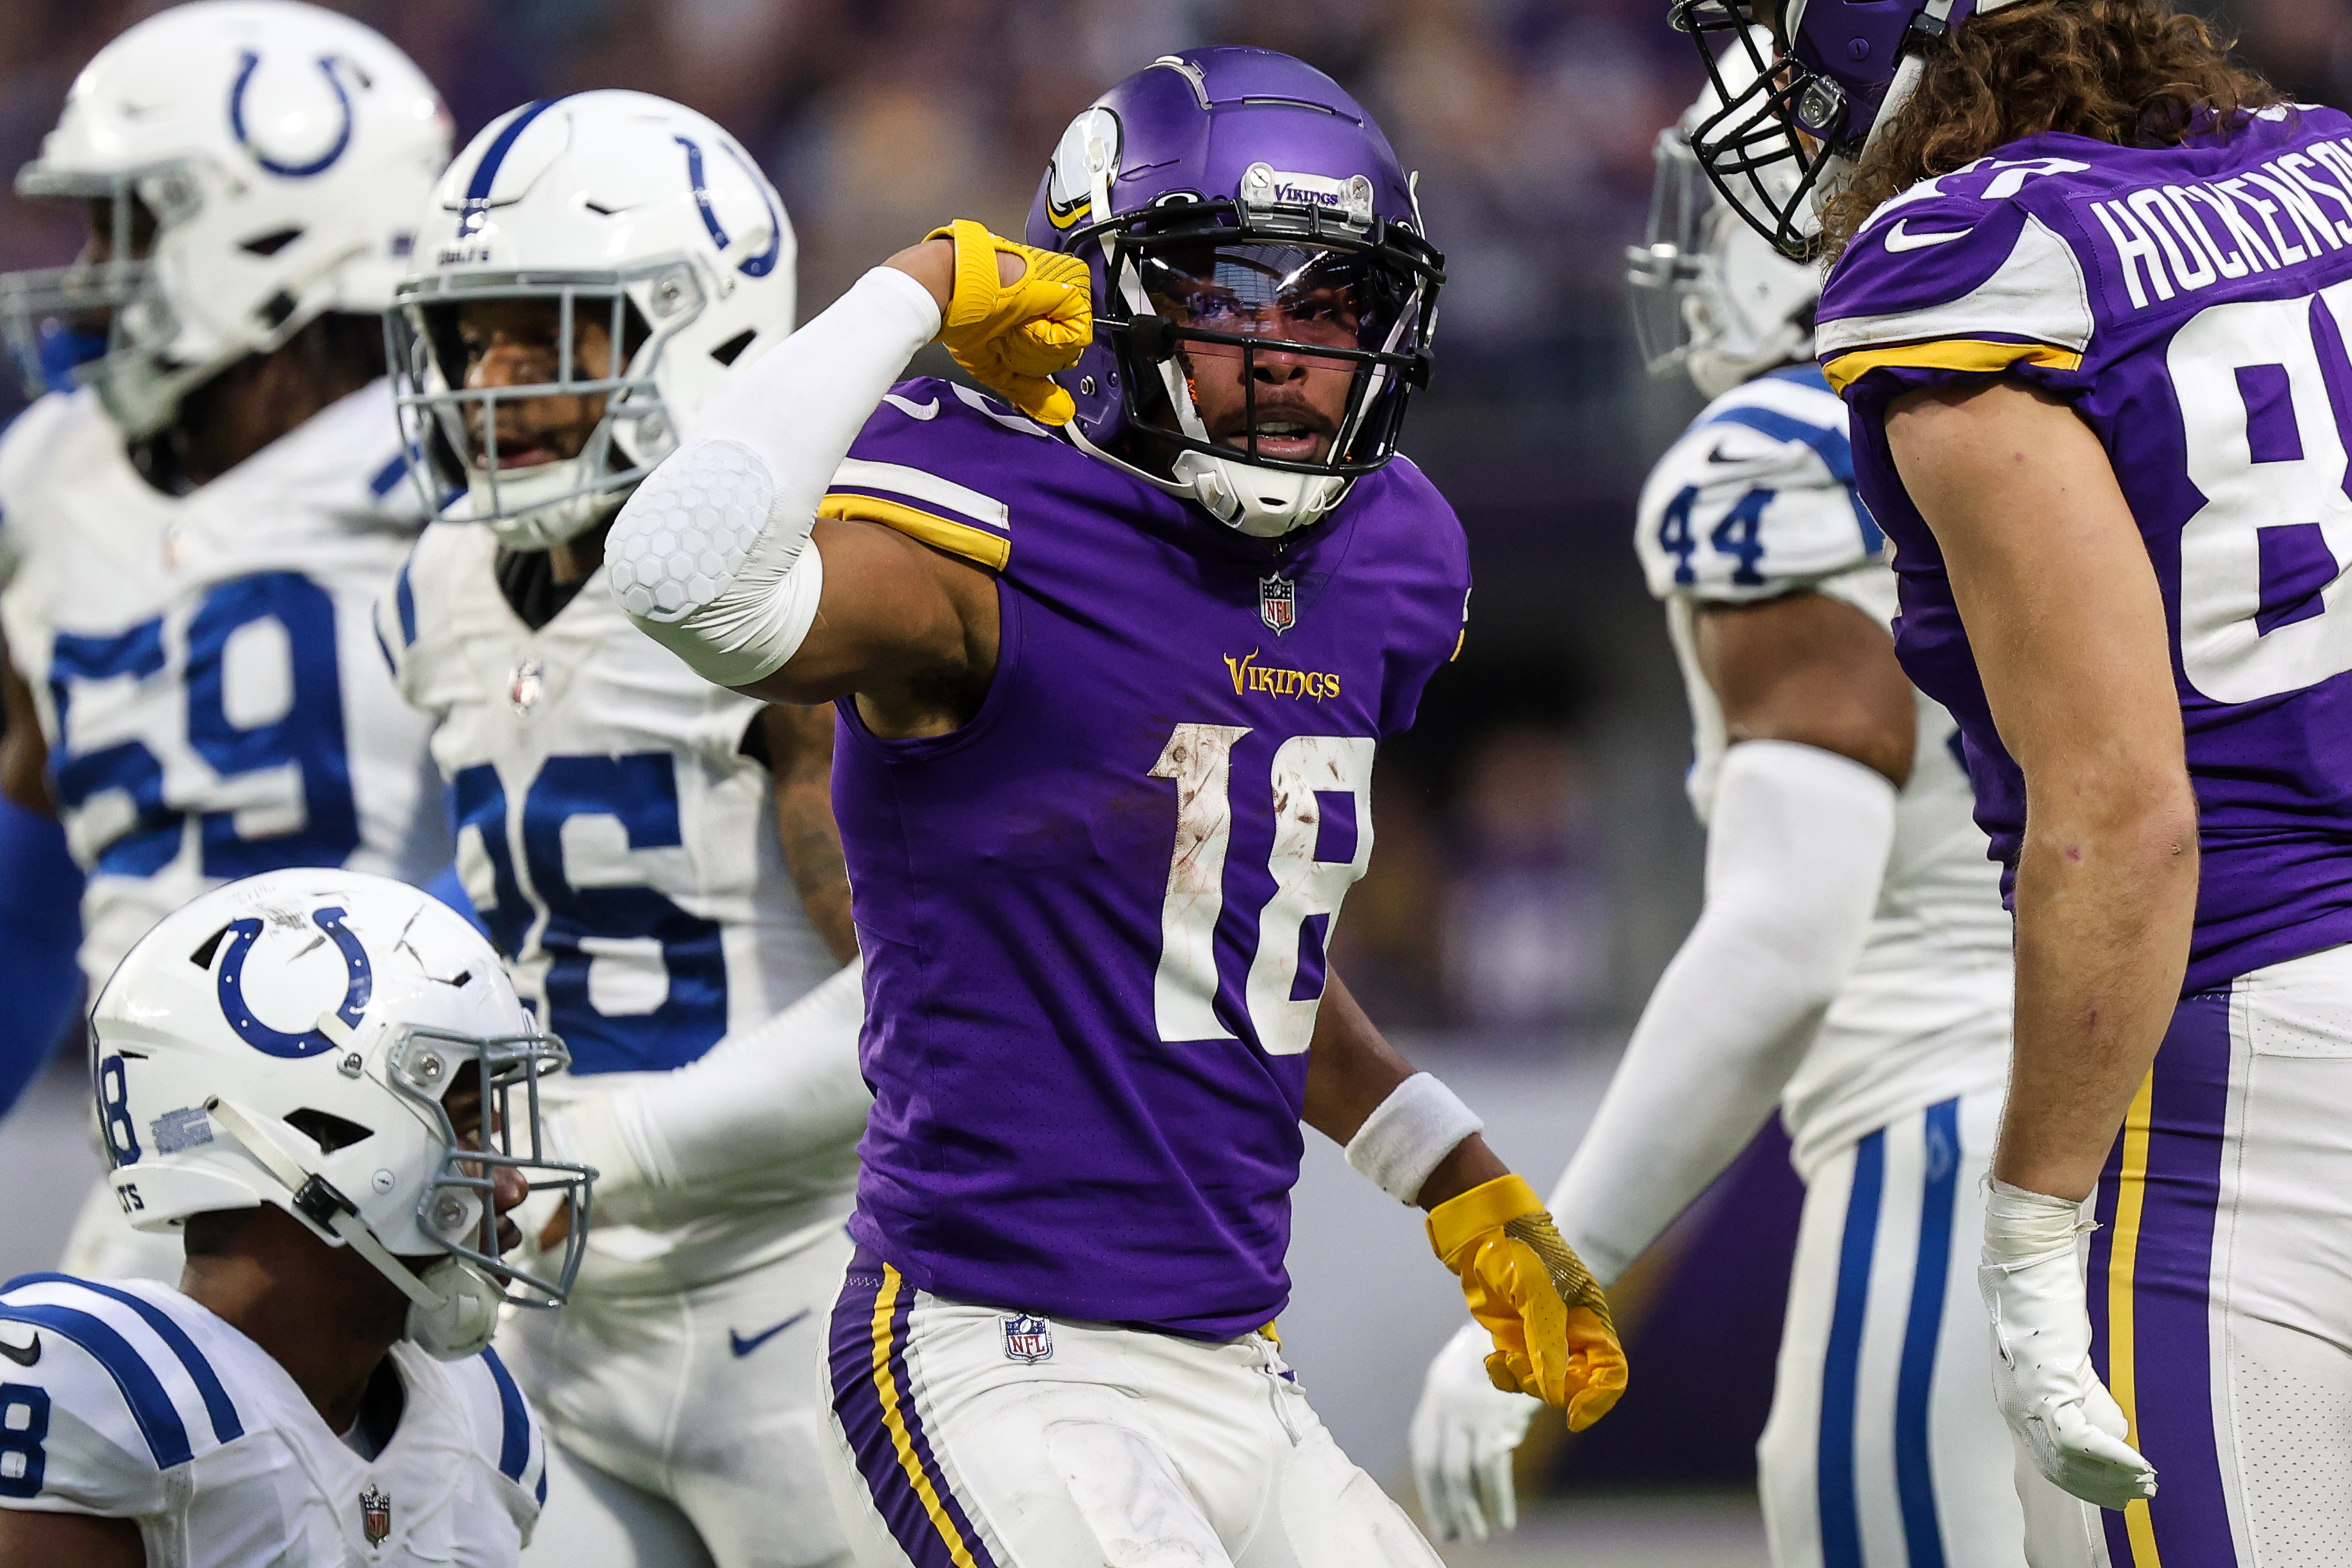 Minnesota Vikings wide receiver Justin Jefferson (18) reacts to his catch during the fourth quarter against the Indianapolis Colts at U.S. Bank Stadium.